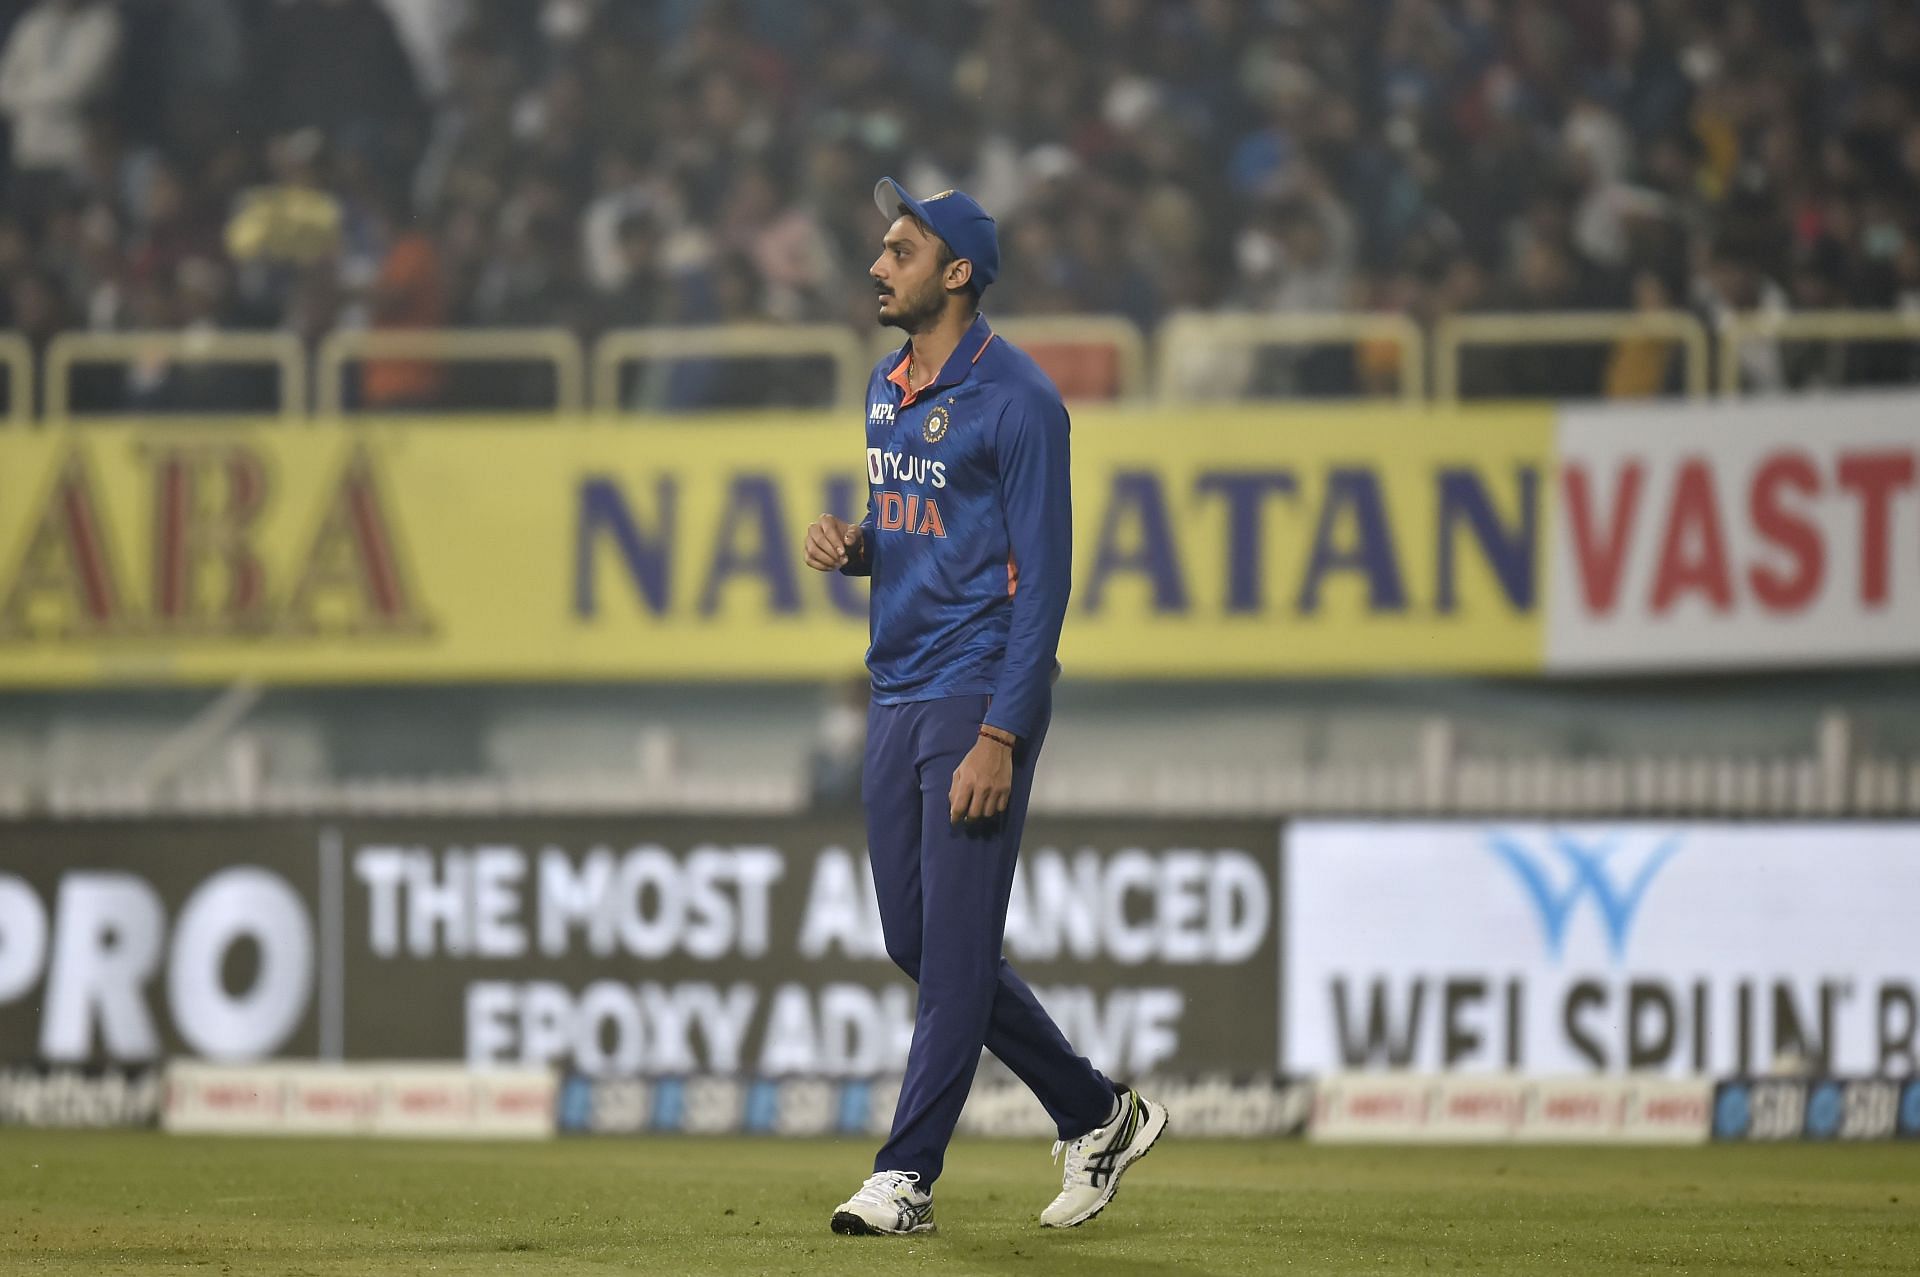 Left-arm spinner Axar Patel. Pic: Getty Images